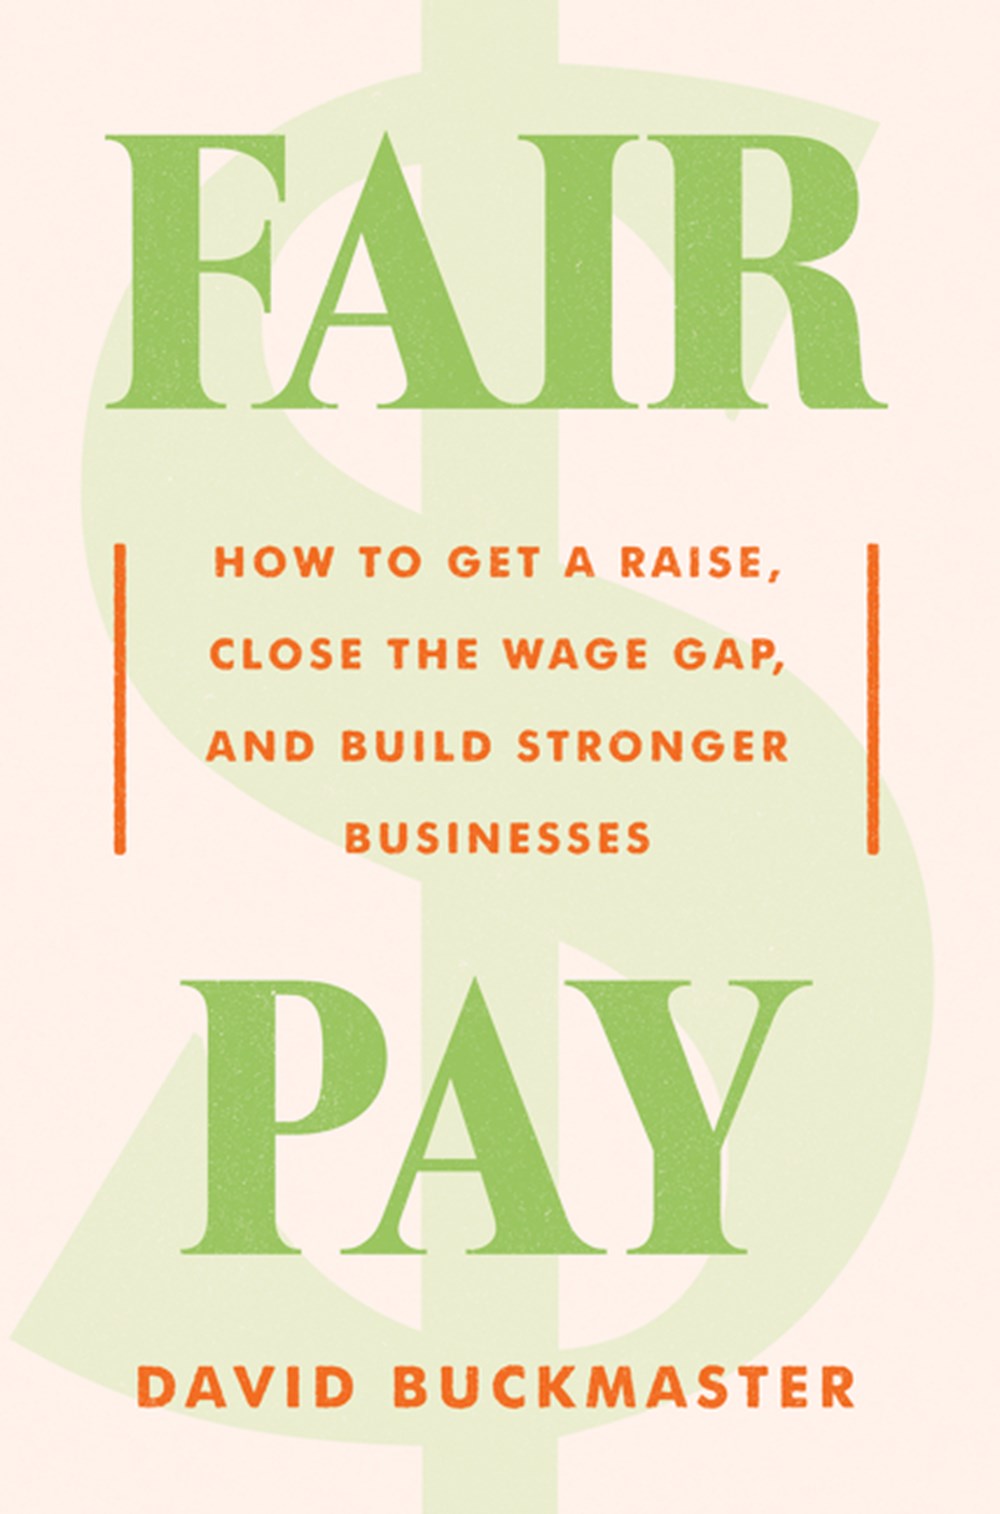 Fair Pay How to Get a Raise, Close the Wage Gap, and Build Stronger Businesses